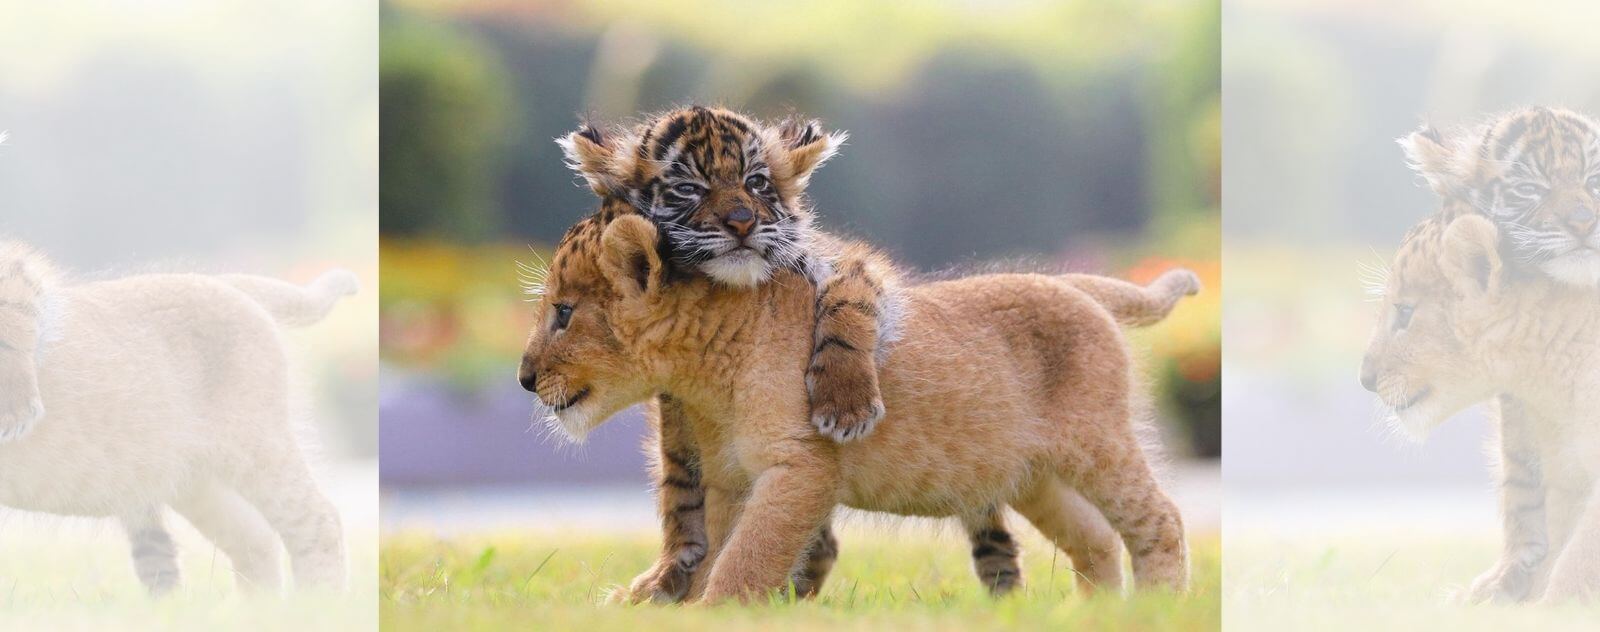 Tiger on a Lion Cub (Lion and Tiger)